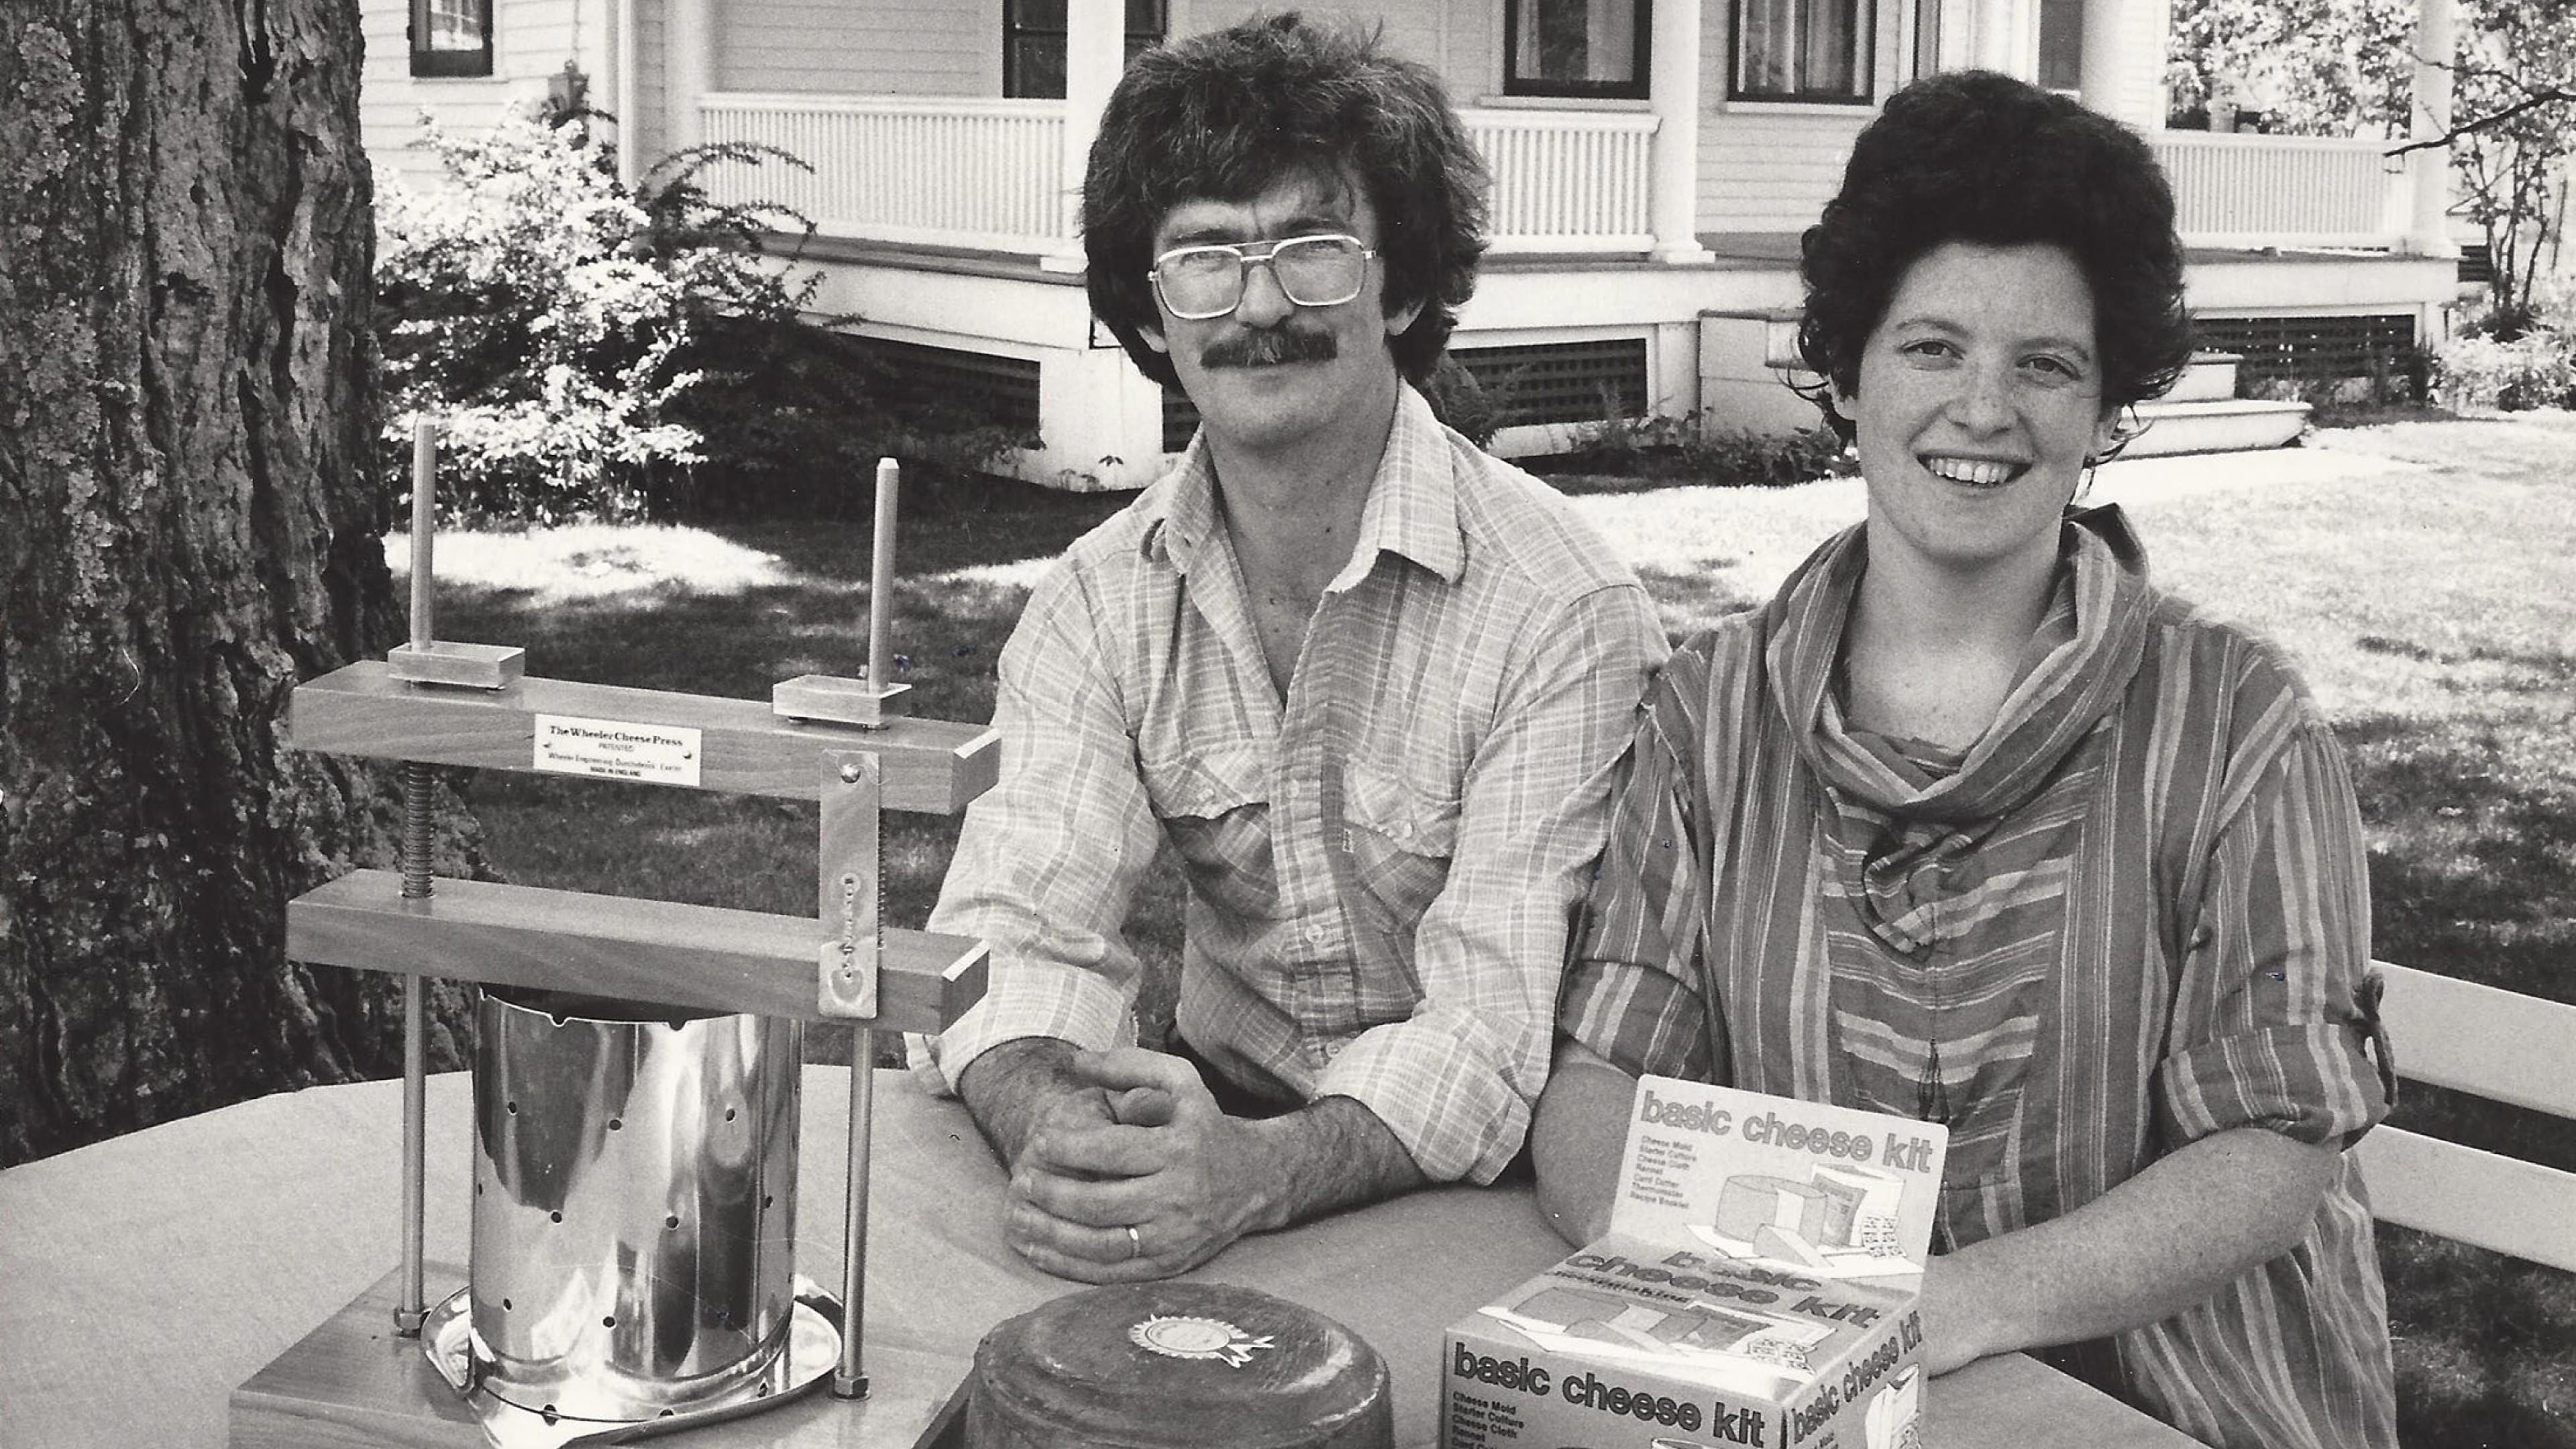 Black and white photo of Robert and Ricki Carroll, founders of New England Cheesemaking Supply Company, sitting outside at a table with a cheese press, waxed homemade cheese and a cheese kit